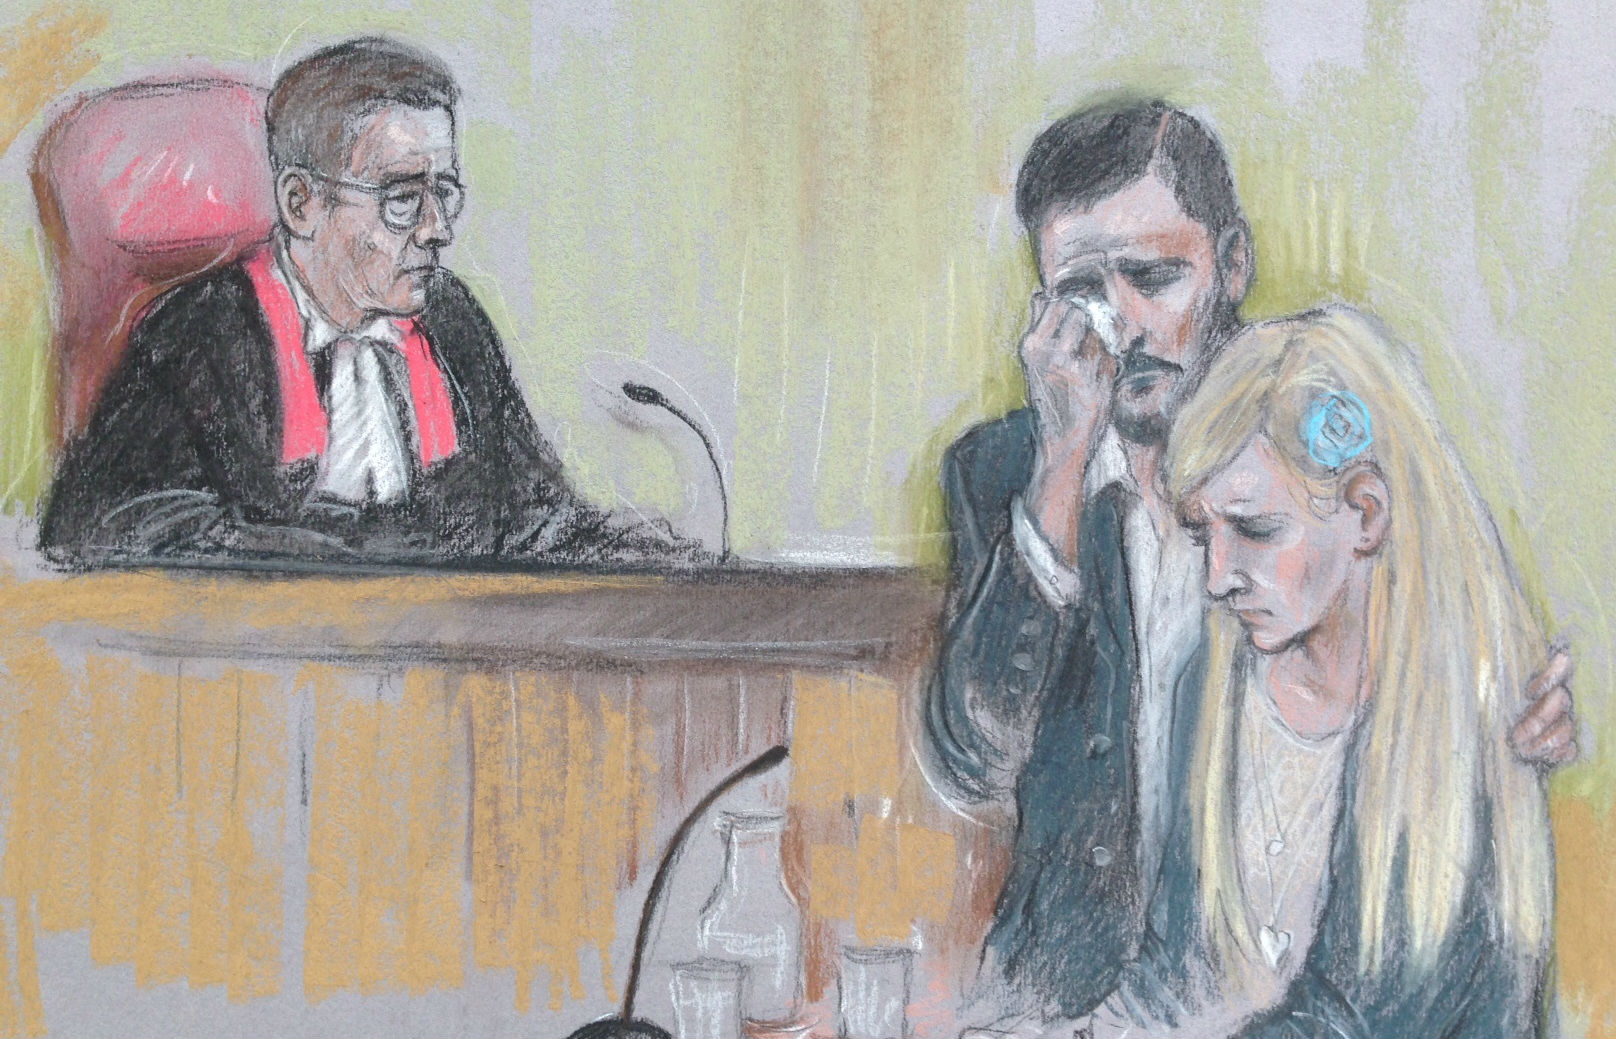 Charlie Gard's mother returns to court to seek permission to take son home to die 